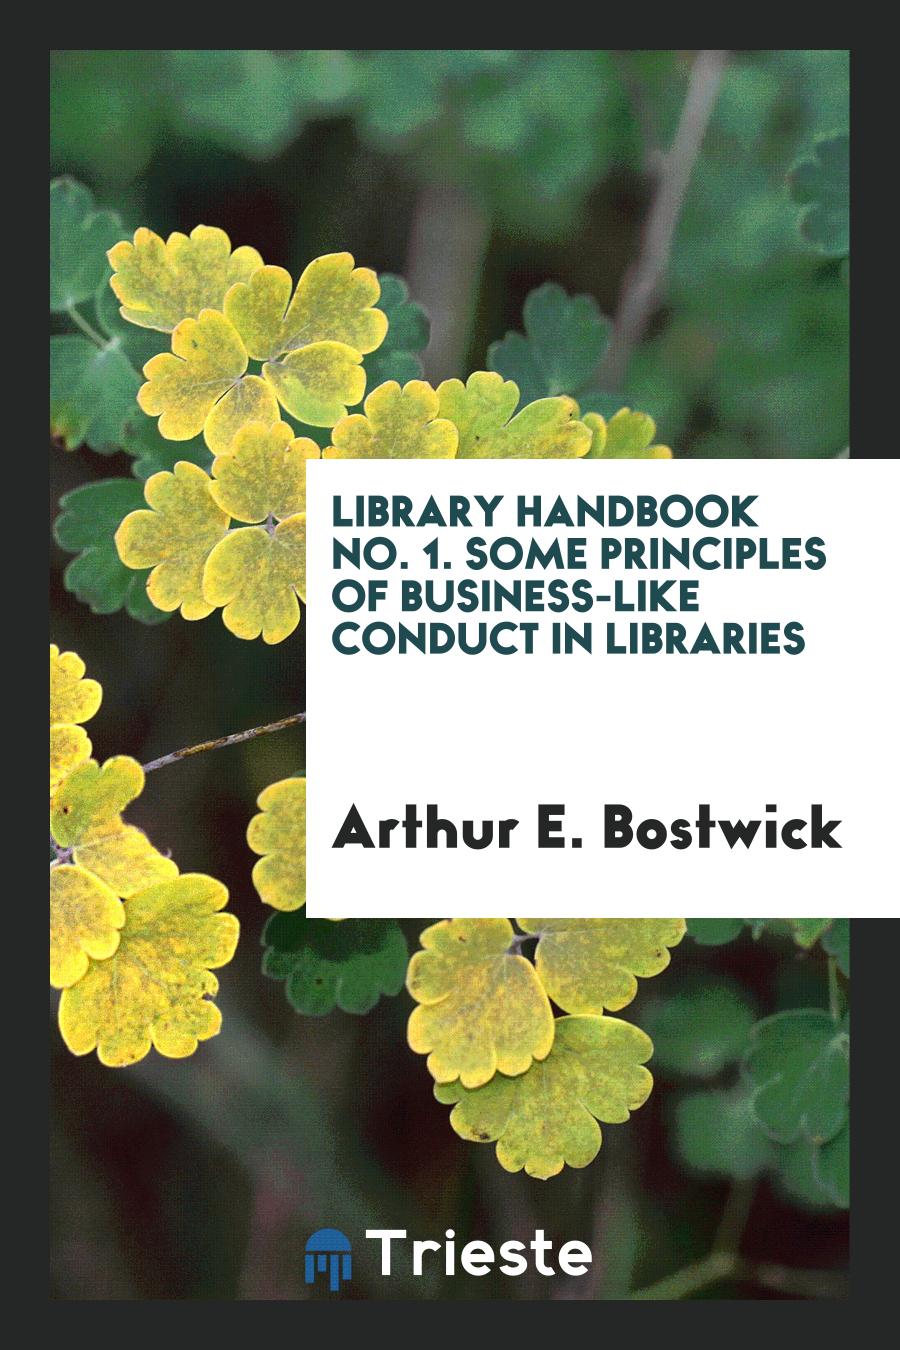 Library handbook No. 1. Some principles of business-like conduct in libraries